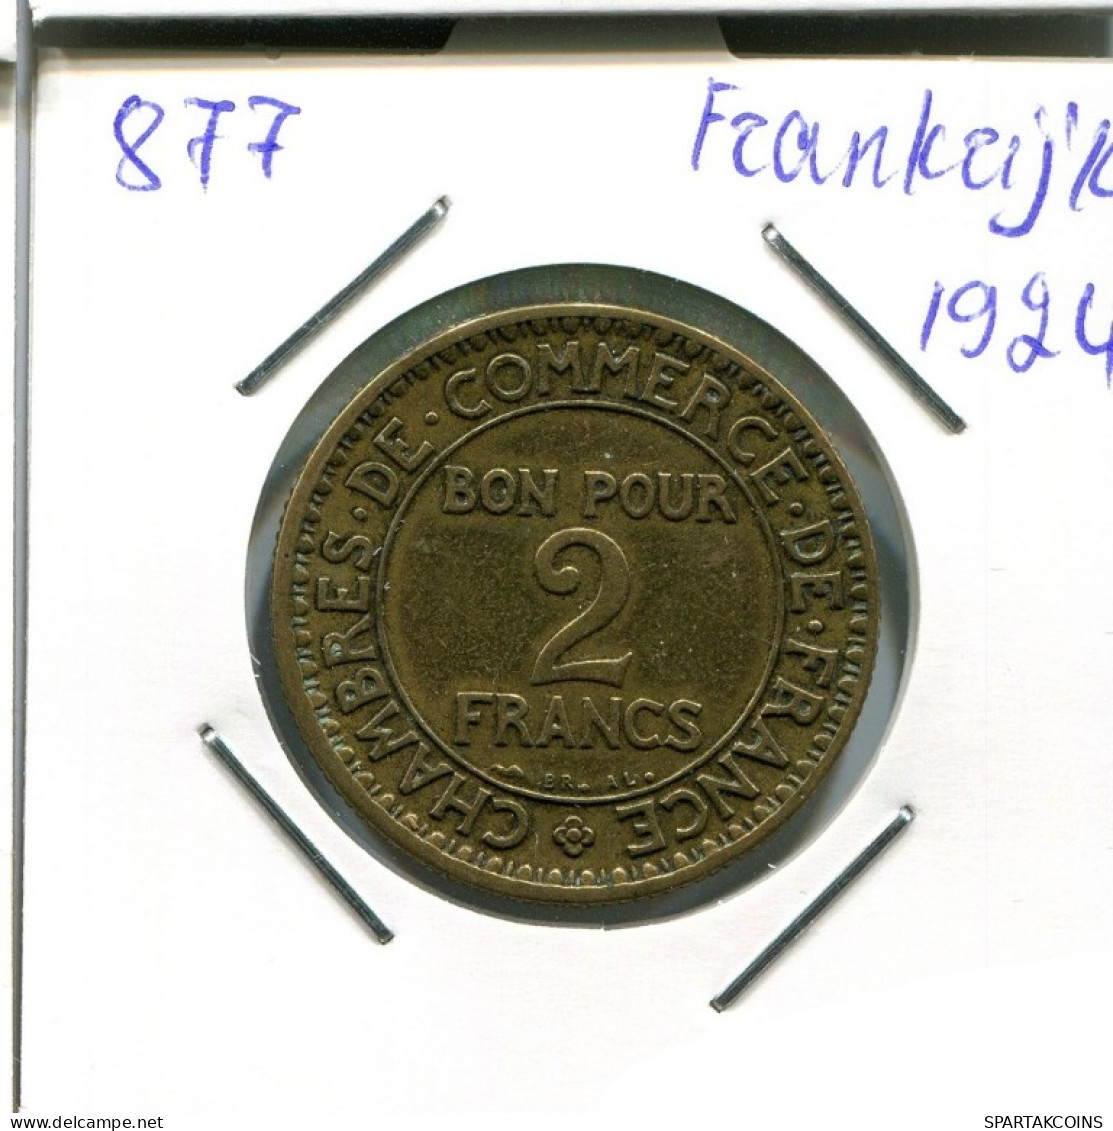 2 FRANCS 1924 FRANCE French Coin #AN334.U.A - 2 Francs